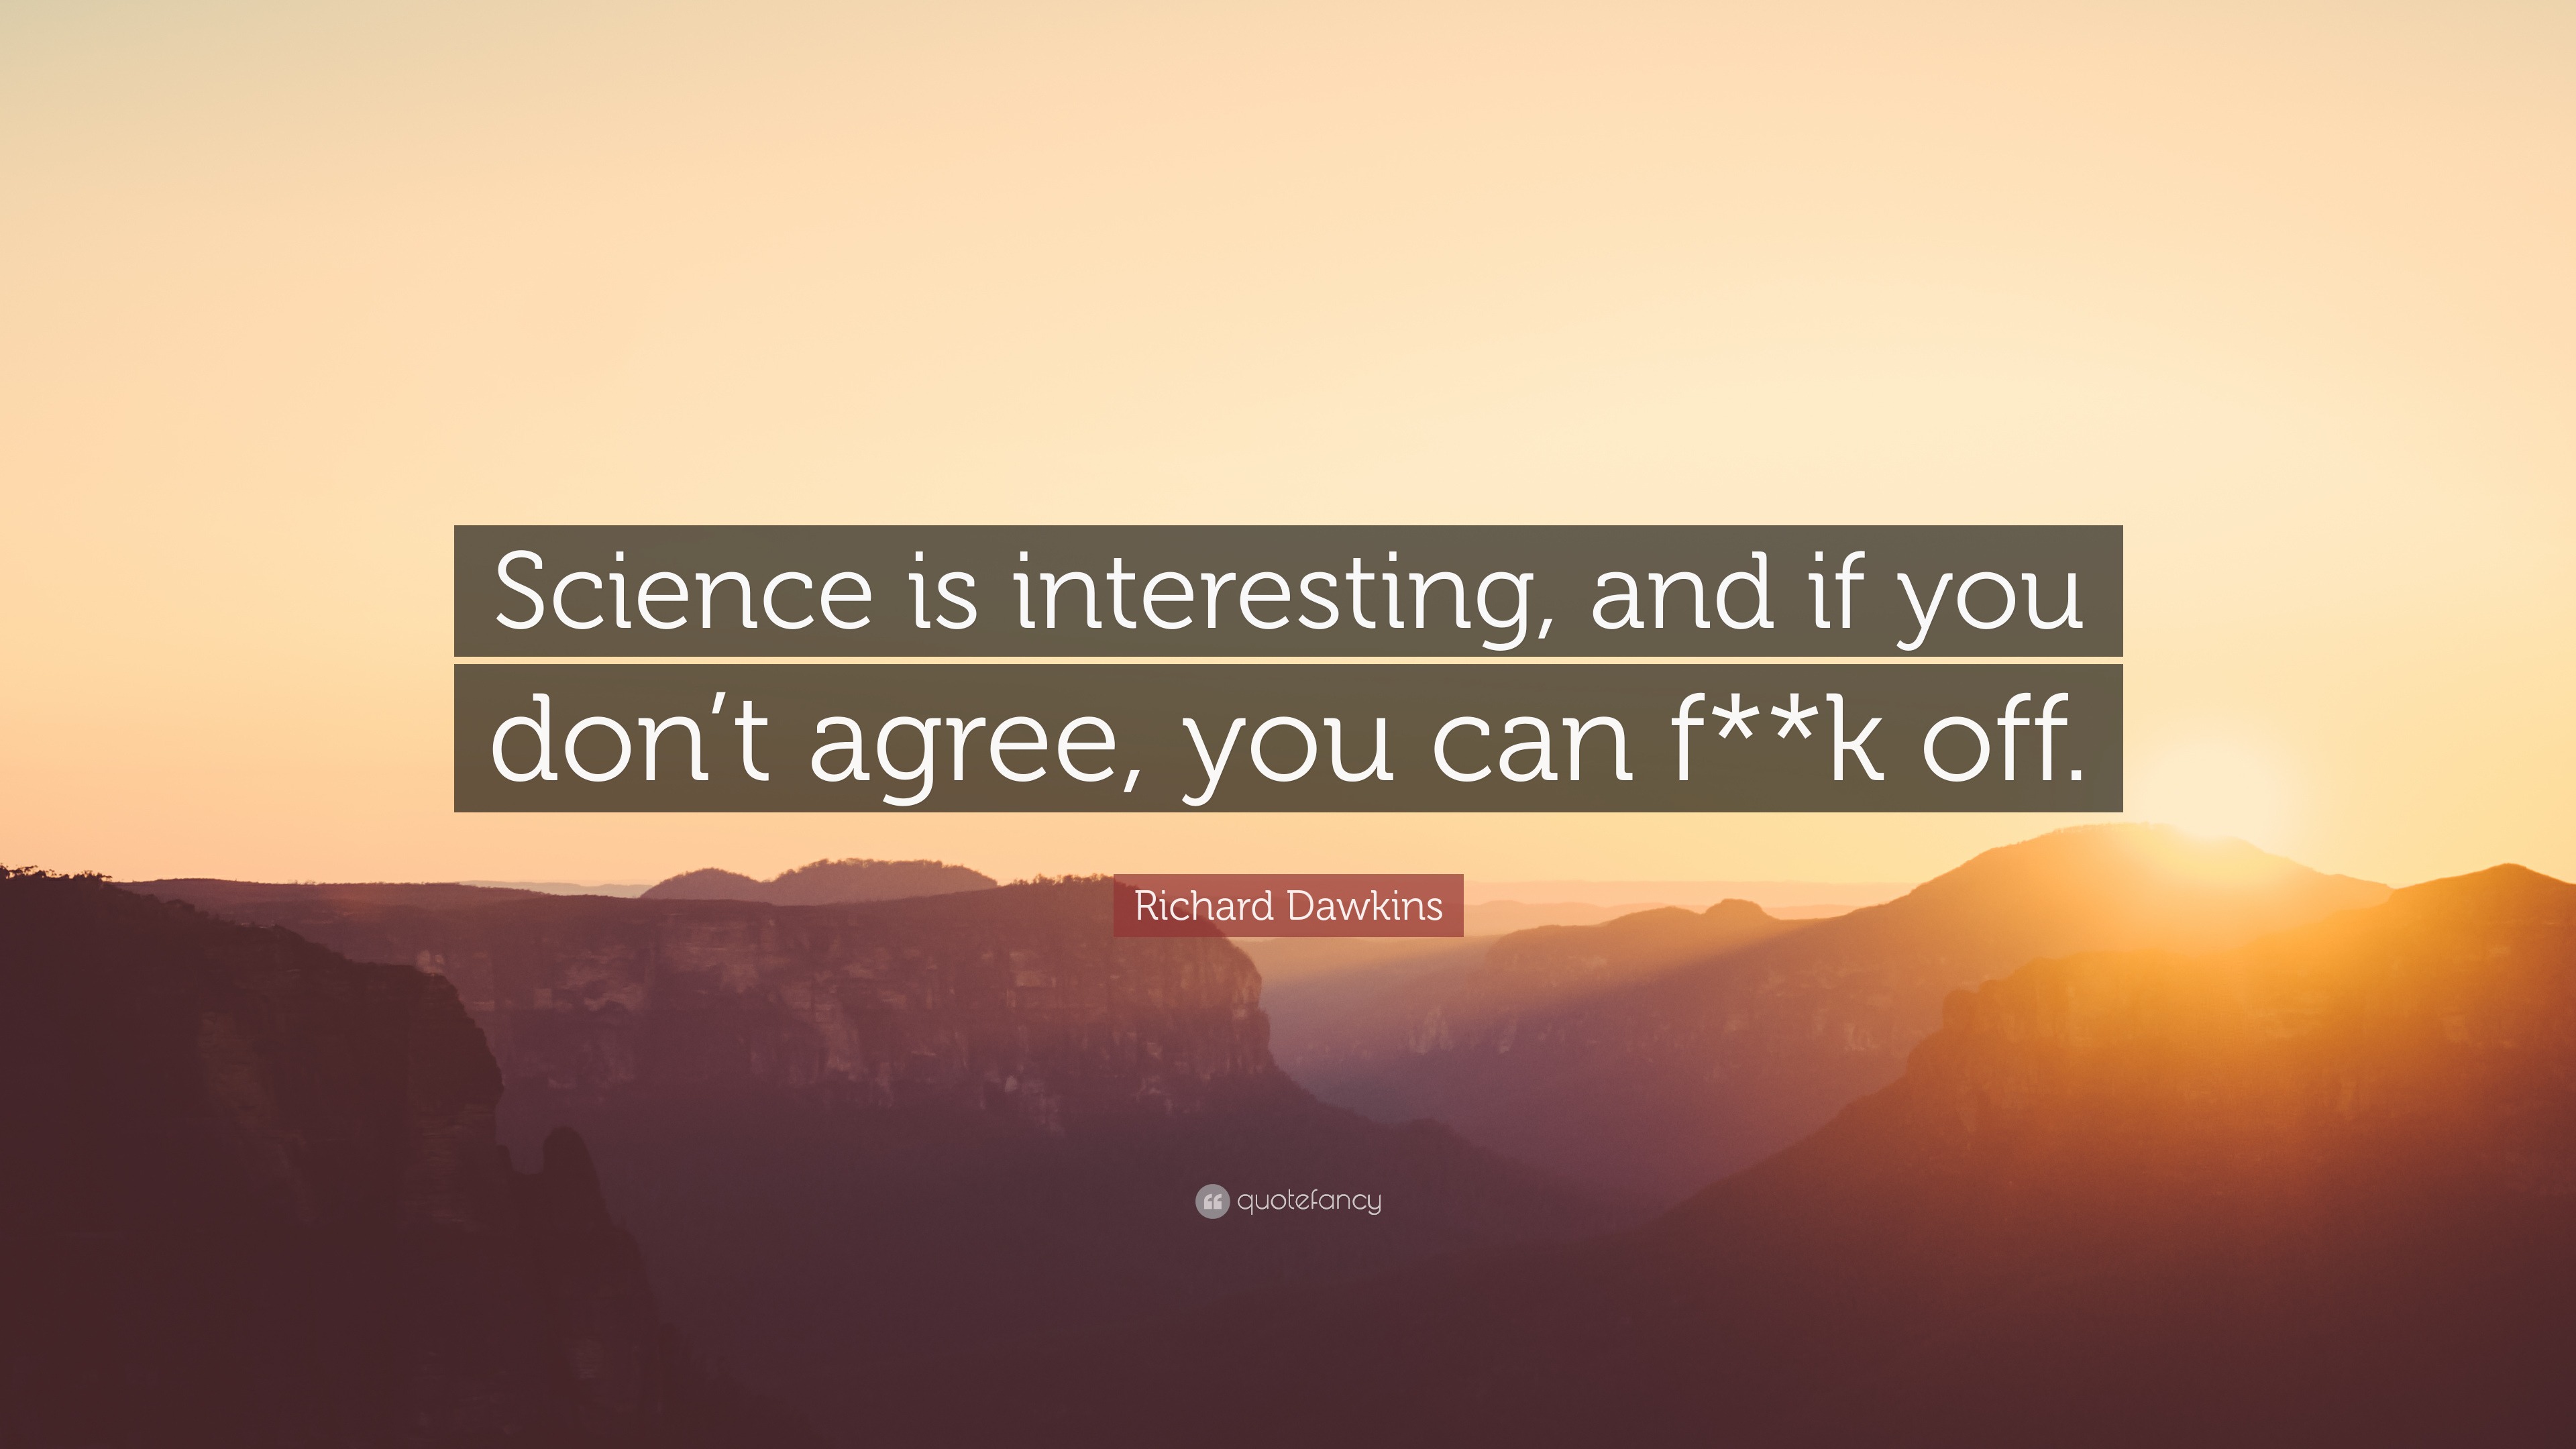 Richard Dawkins Quote “science Is Interesting And If You Dont Agree